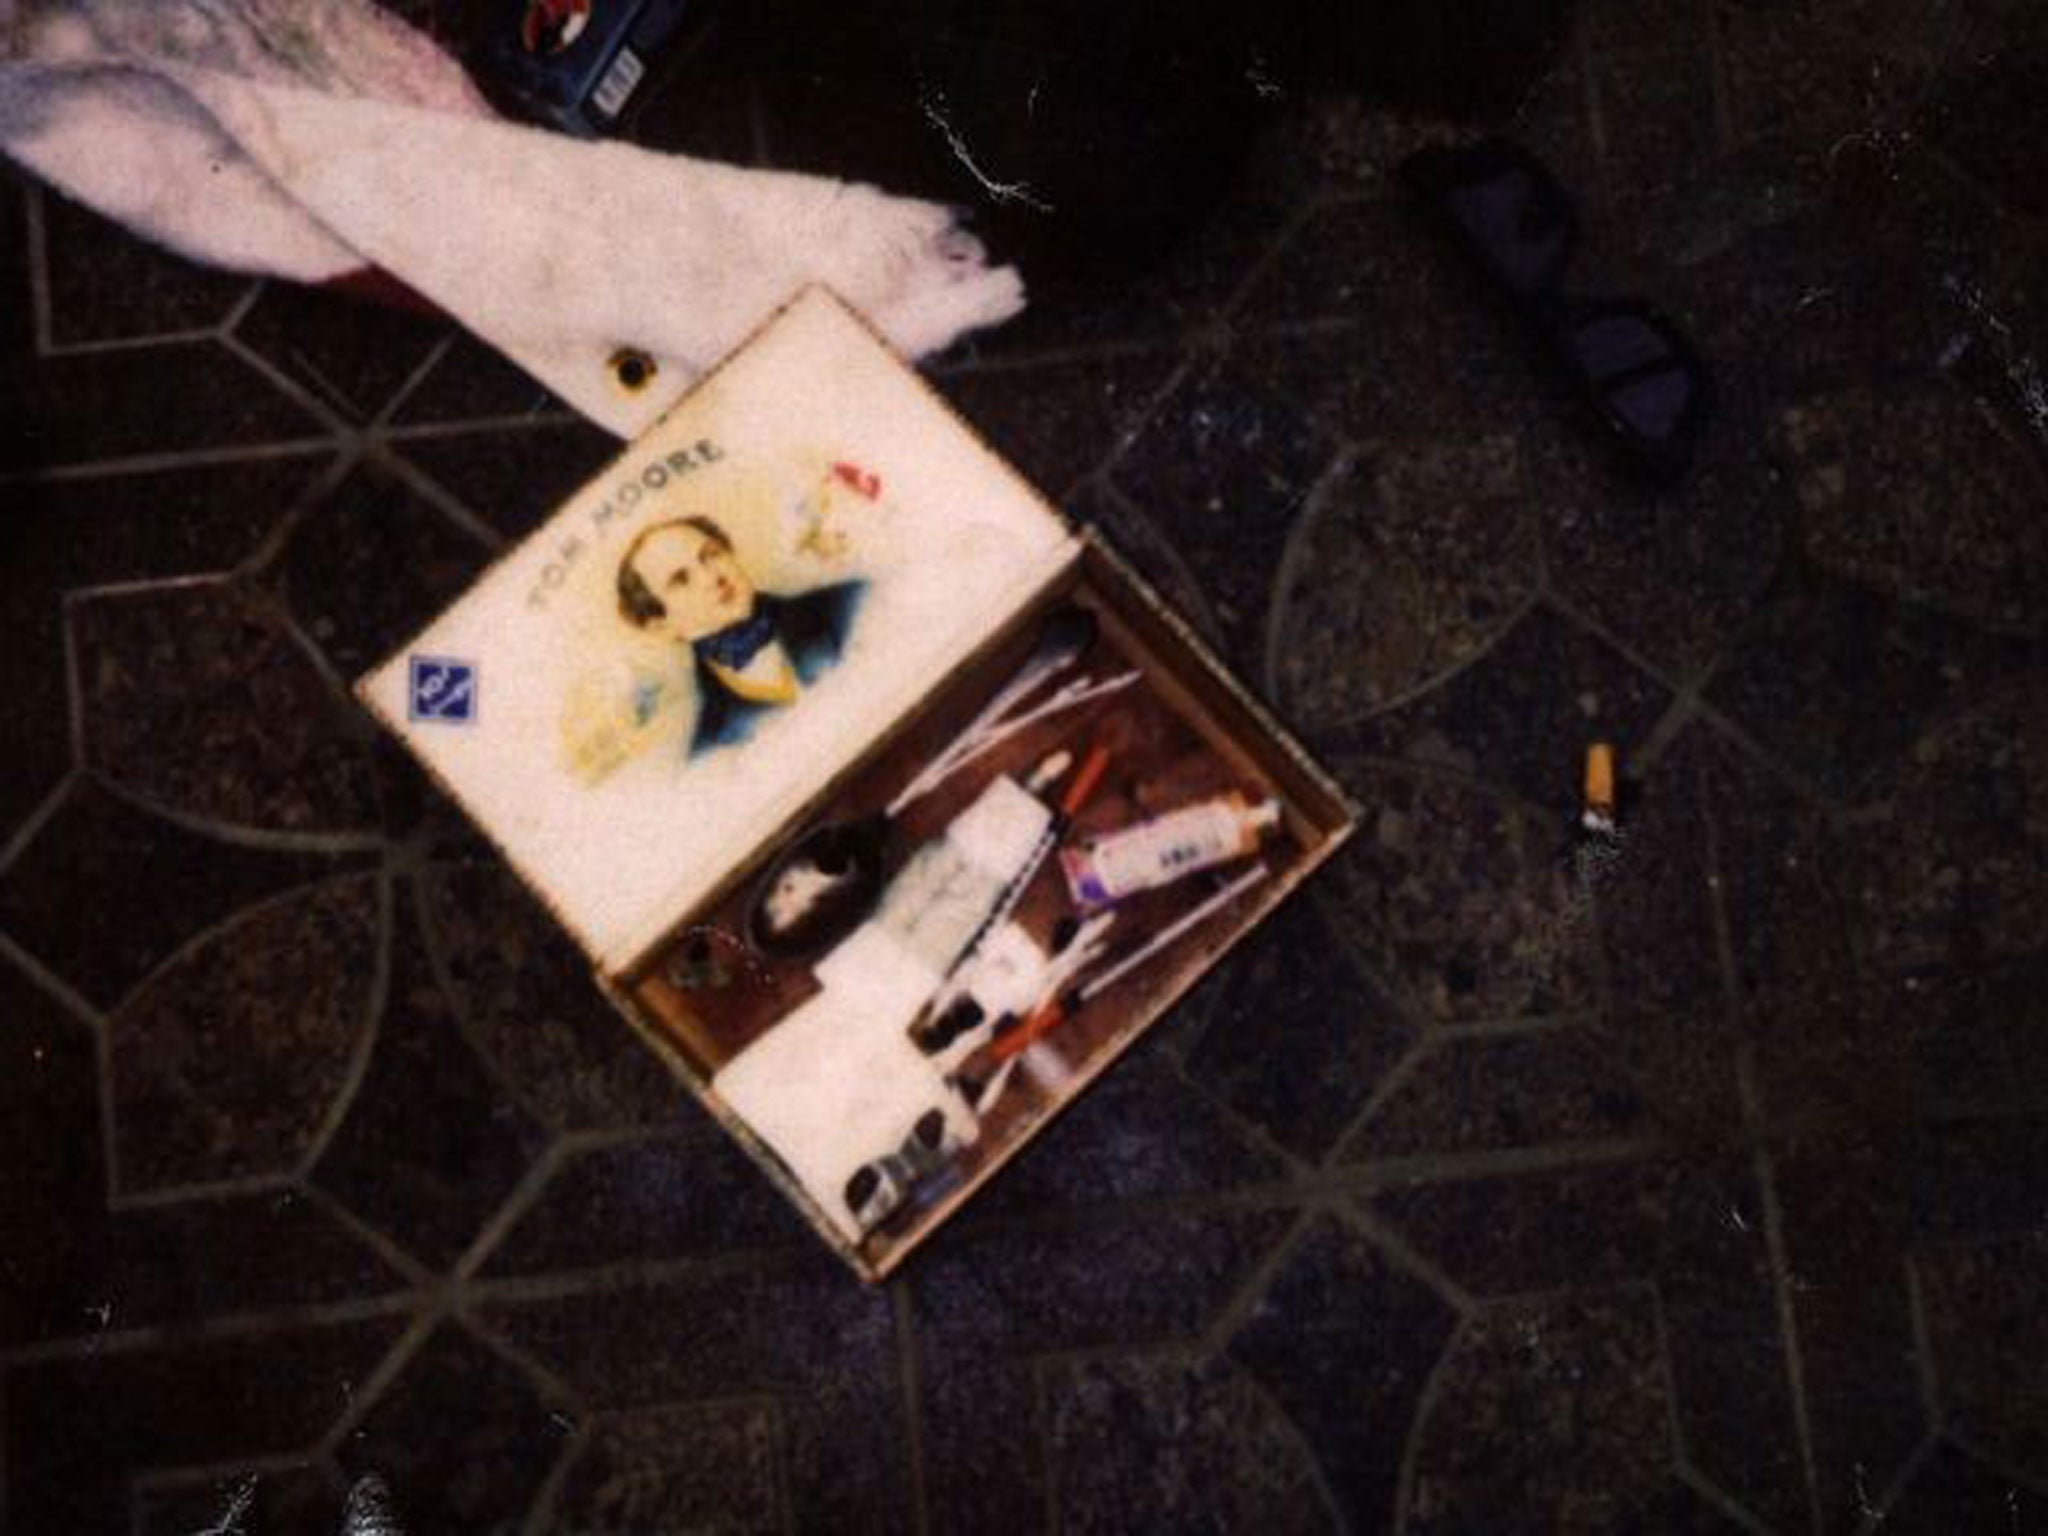 The images showed drug paraphernalia found at Cobain's home at the time of his death